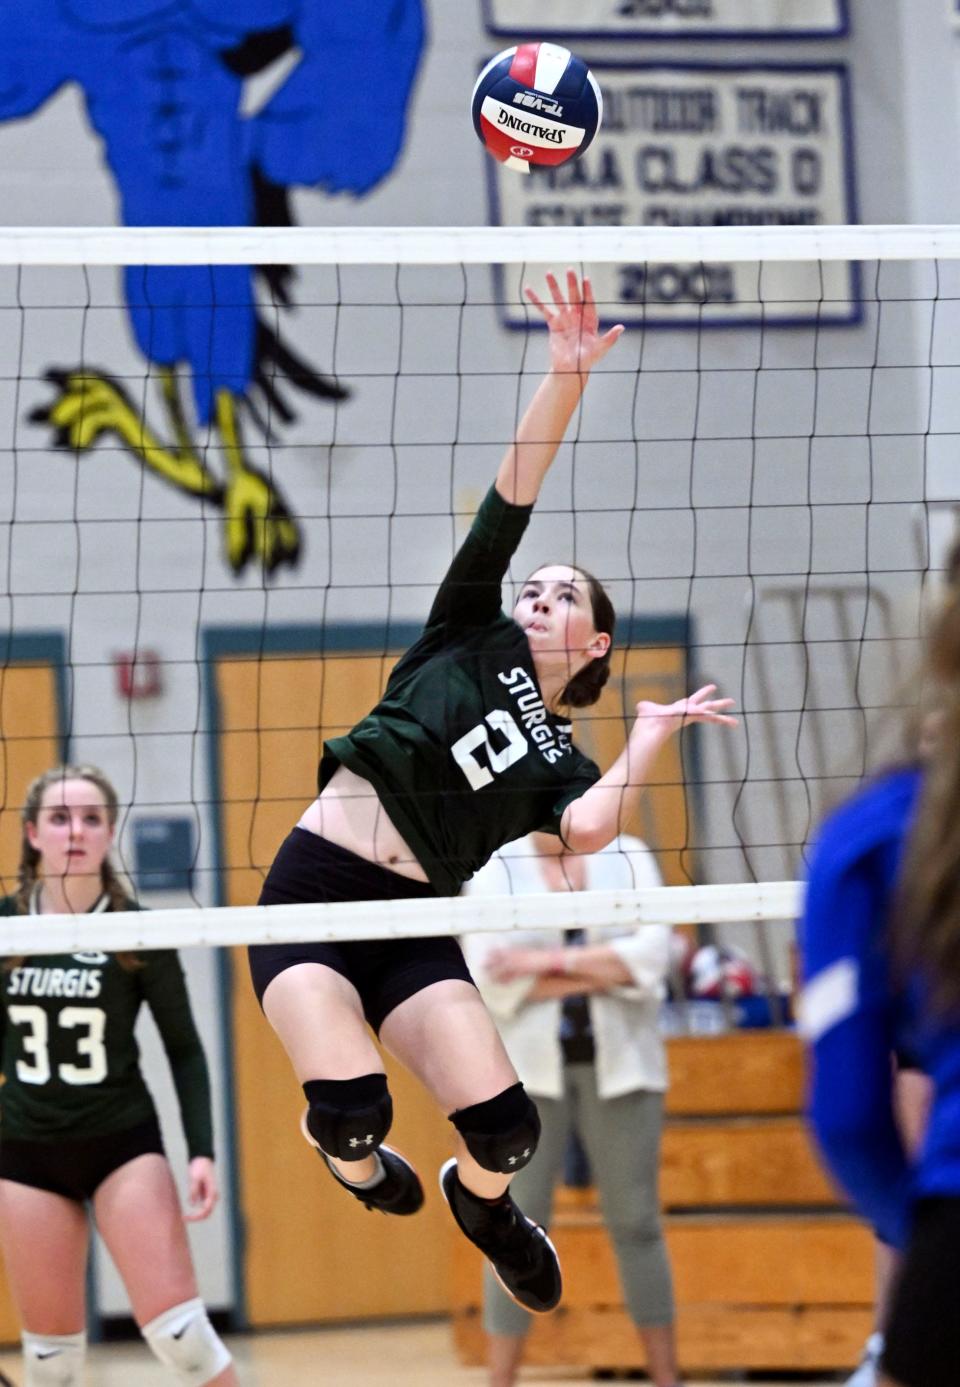 Brodie Gerlach of Sturgis West hits the ball over the net against Mashpee.